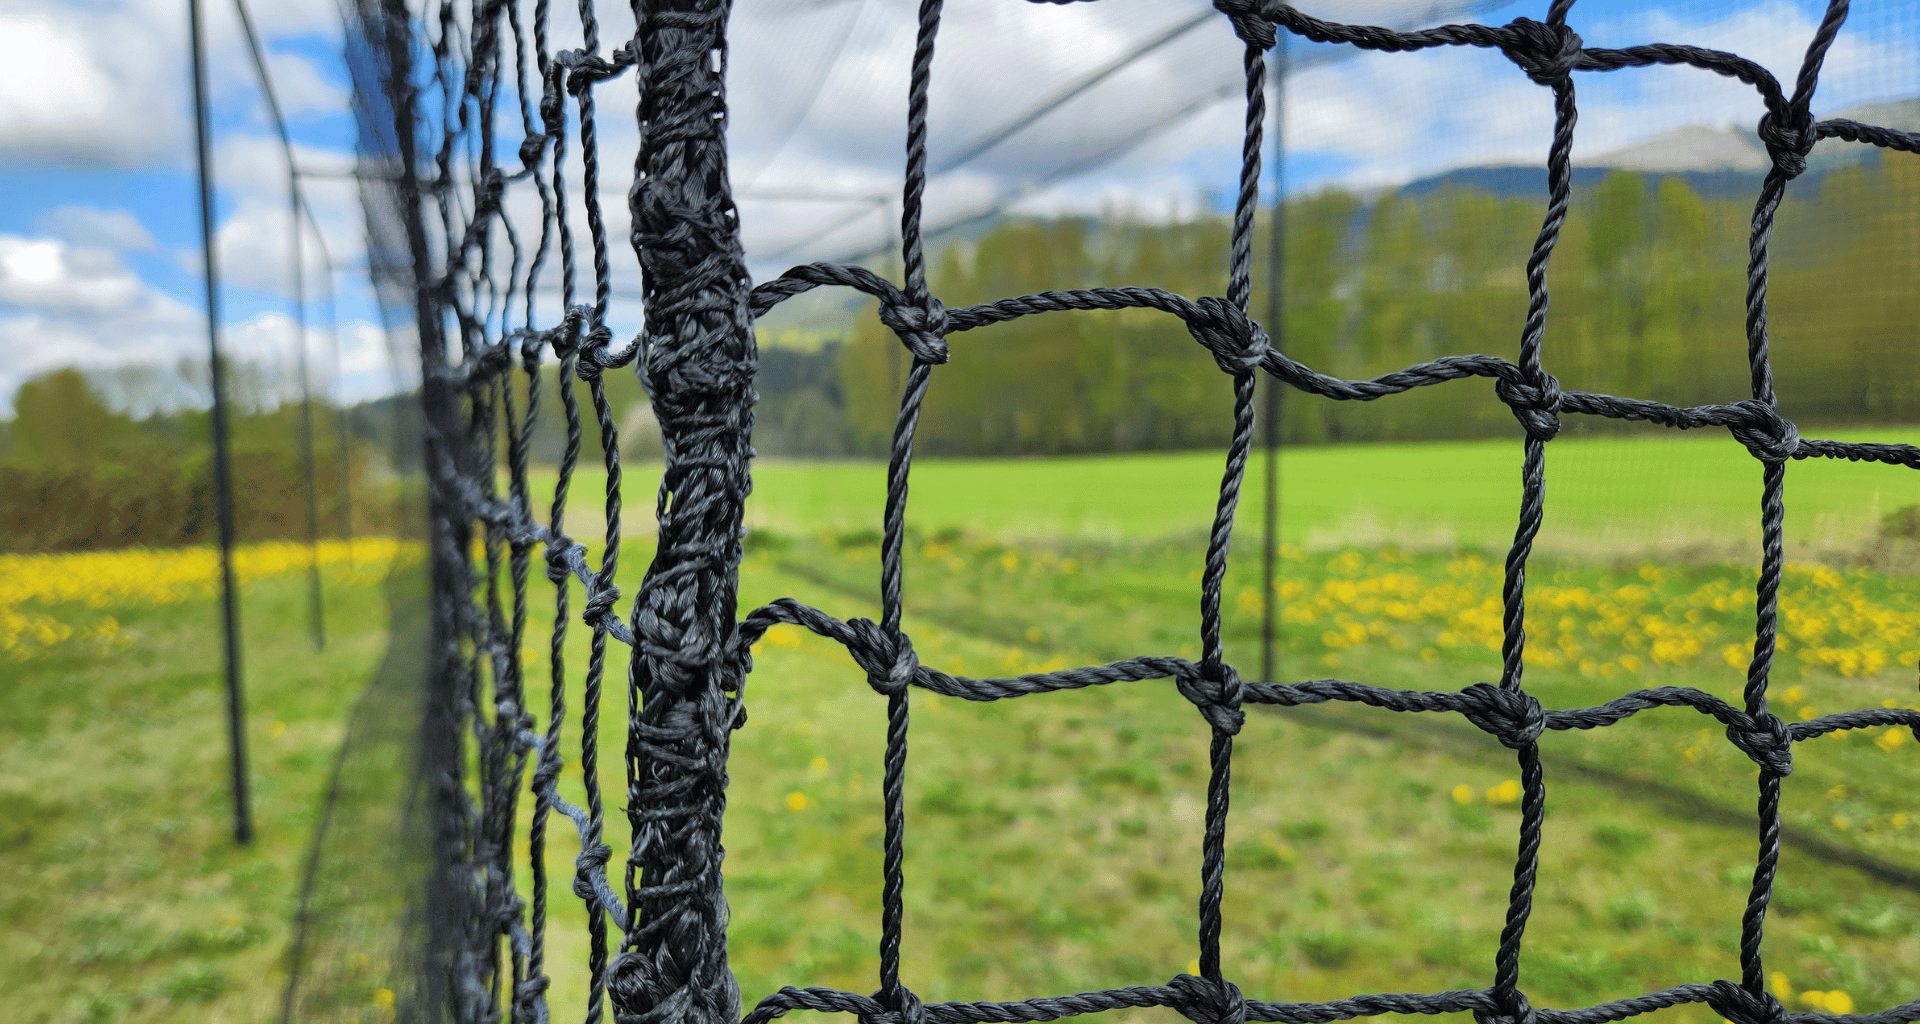 6 Tips for Year-Round Care of Your Batting Cage Net